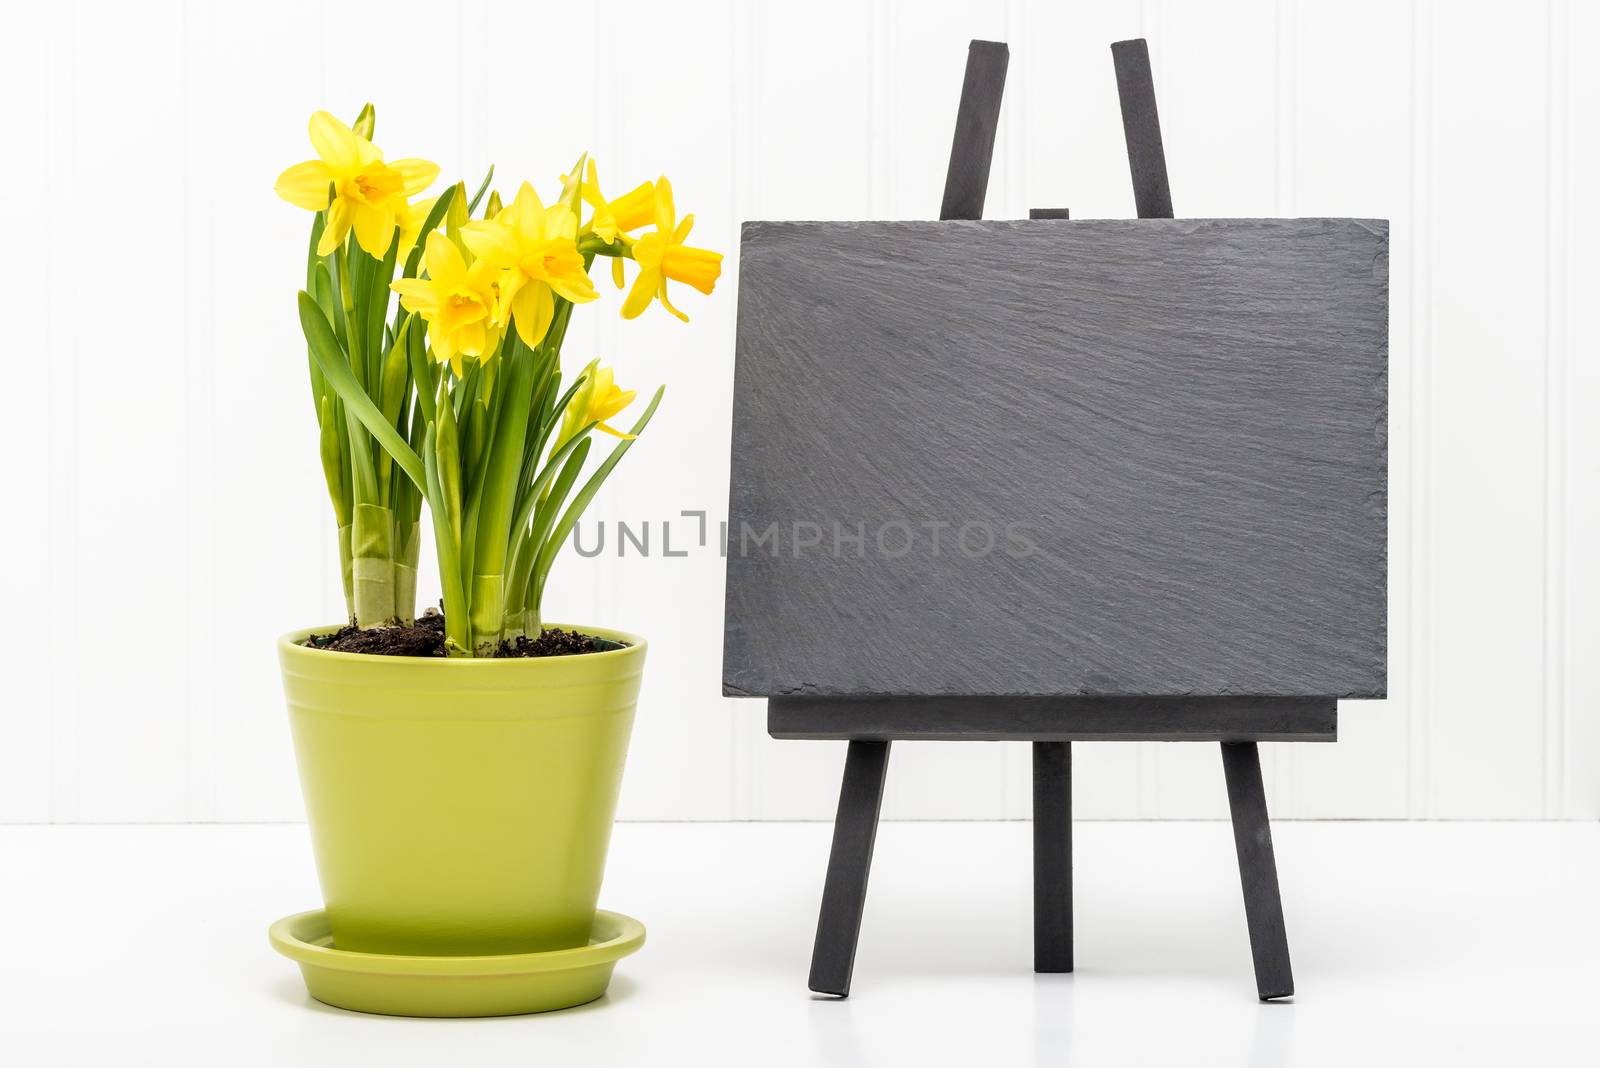 Spring daffodils and a blank slate suitable for including your own message.